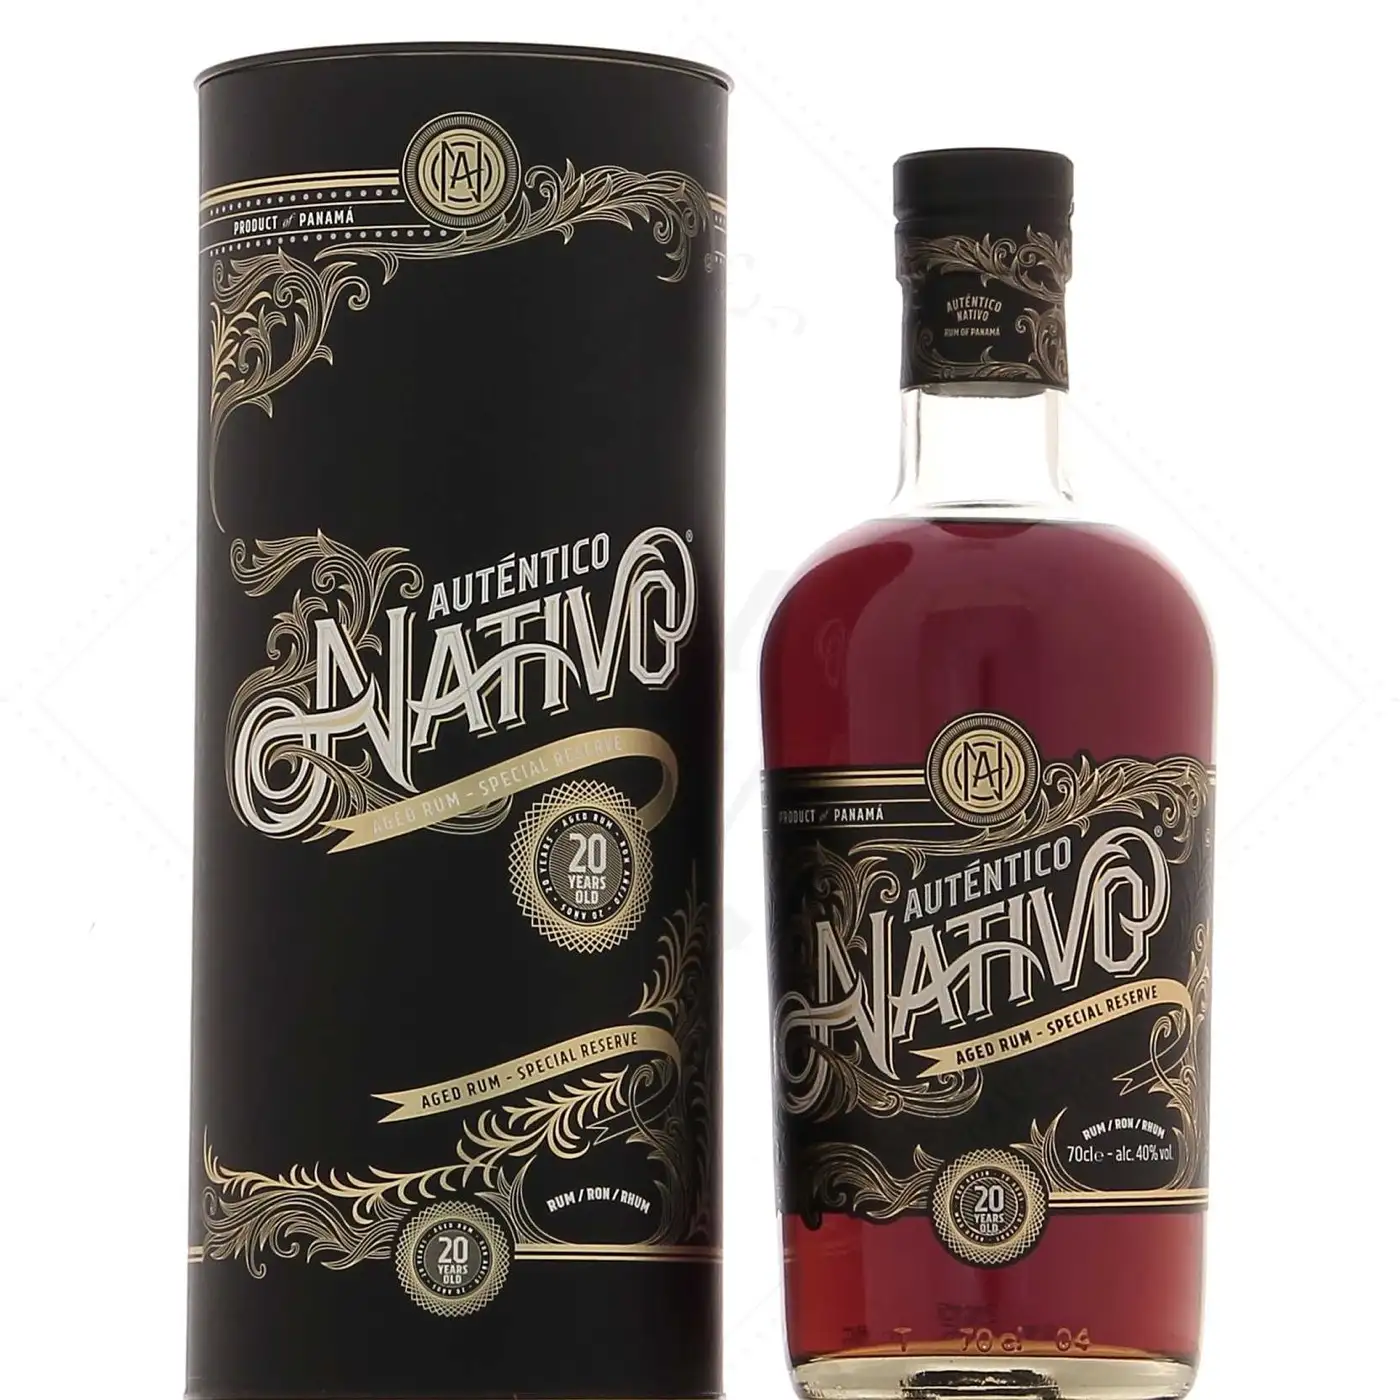 Image of the front of the bottle of the rum Auténtico Nativo 20 Años